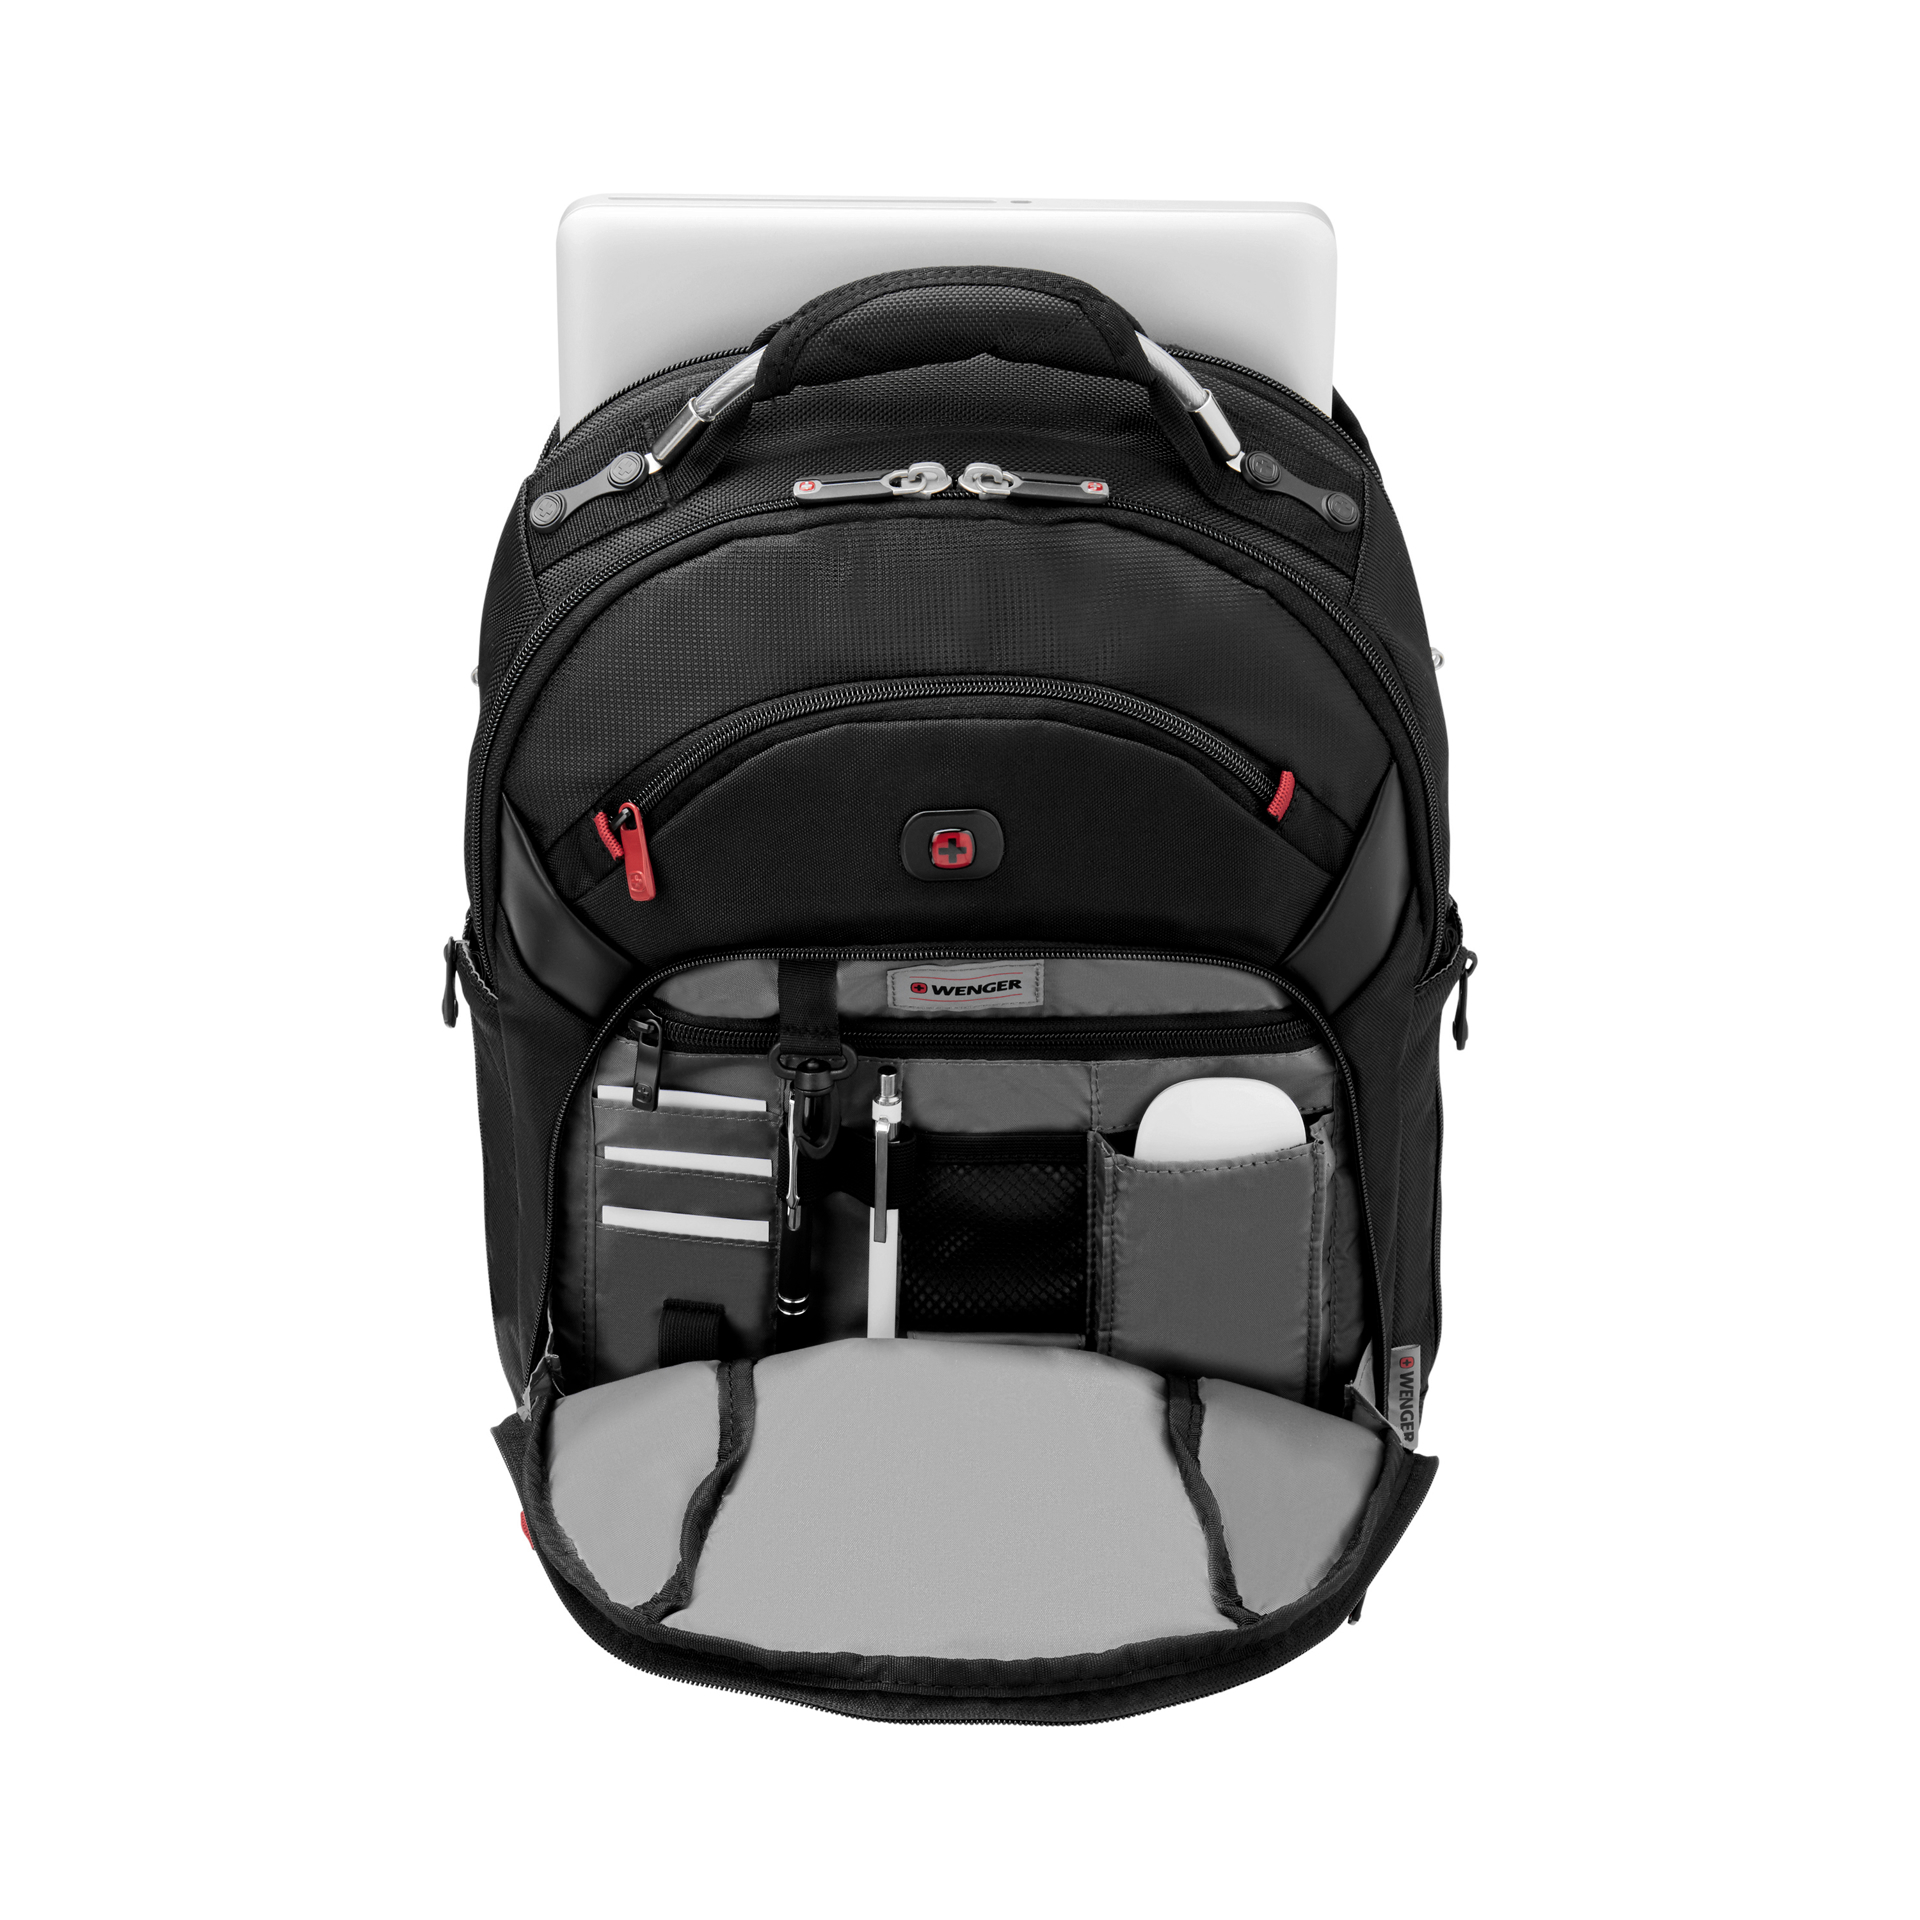 Wenger Gigabyte Backpack showing compartments